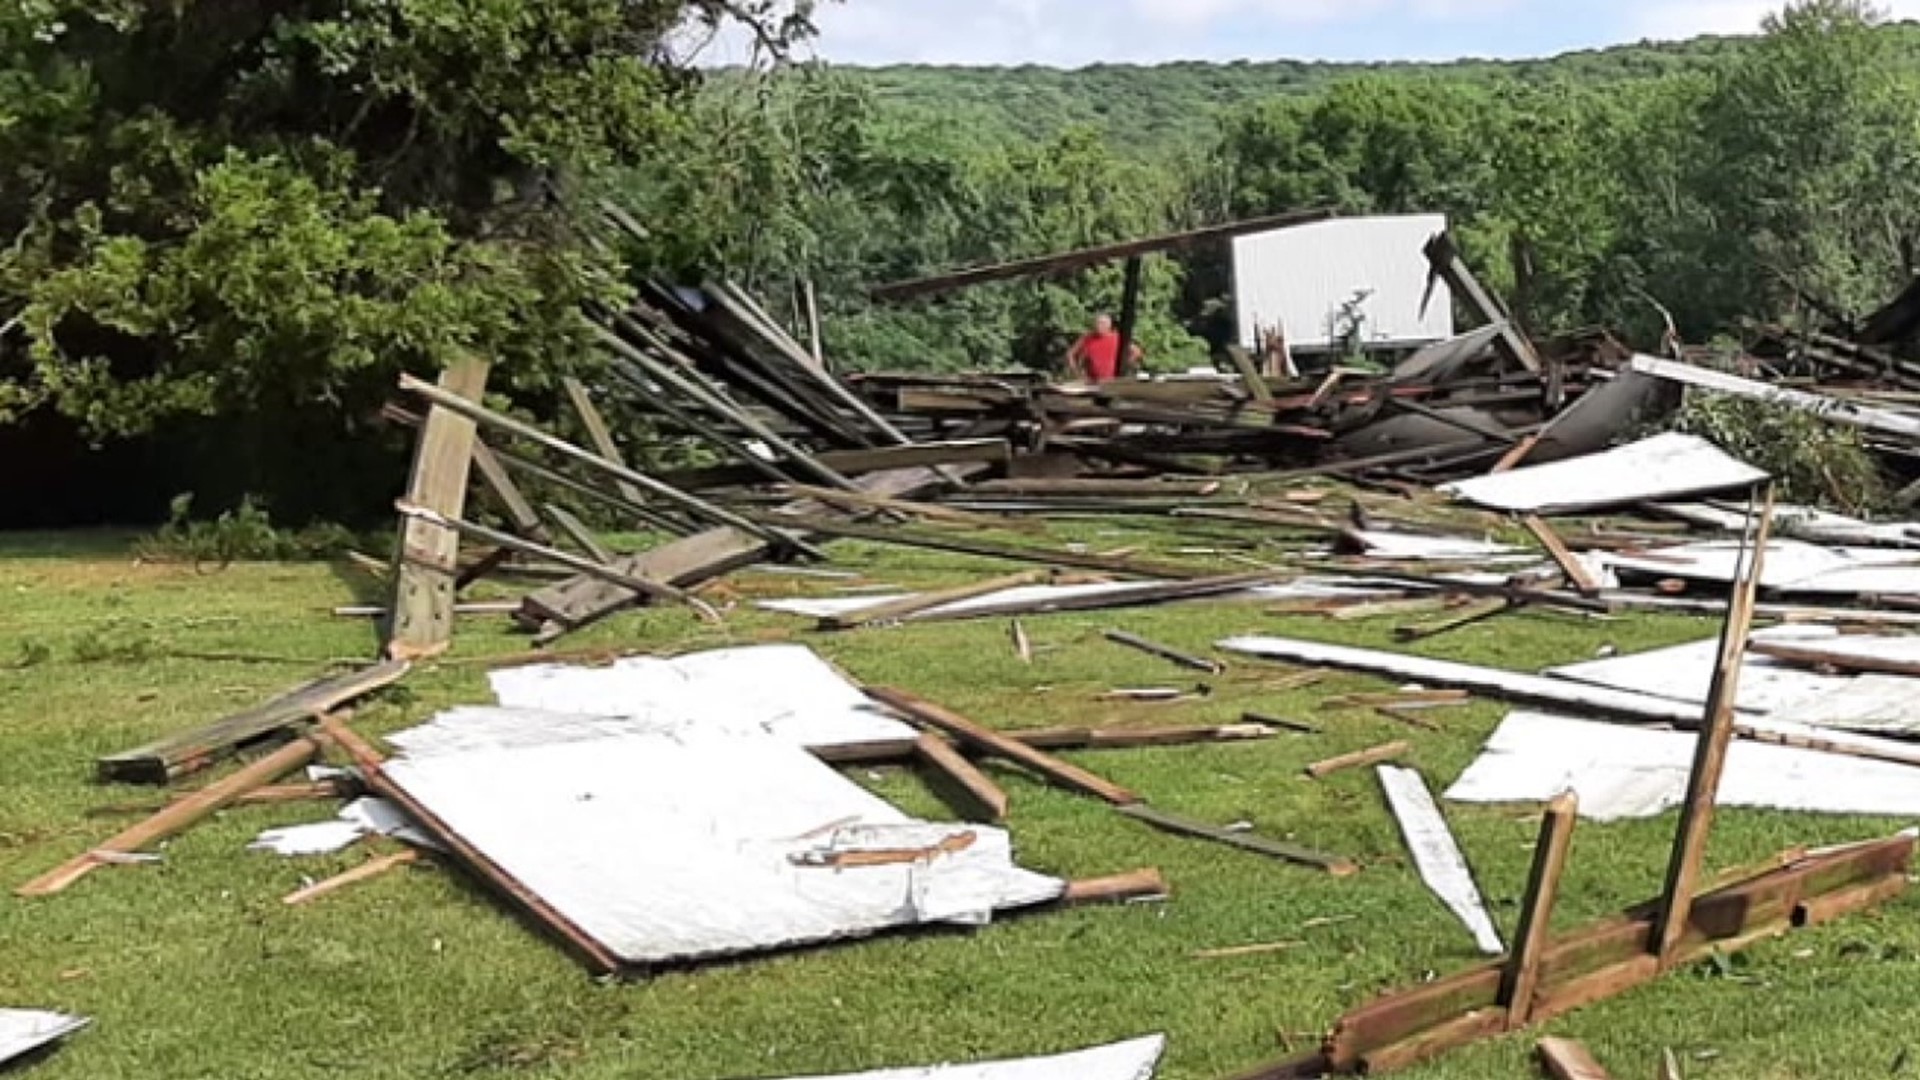 Damage was reported in Clinton, Montour, and Northumbeland Counties